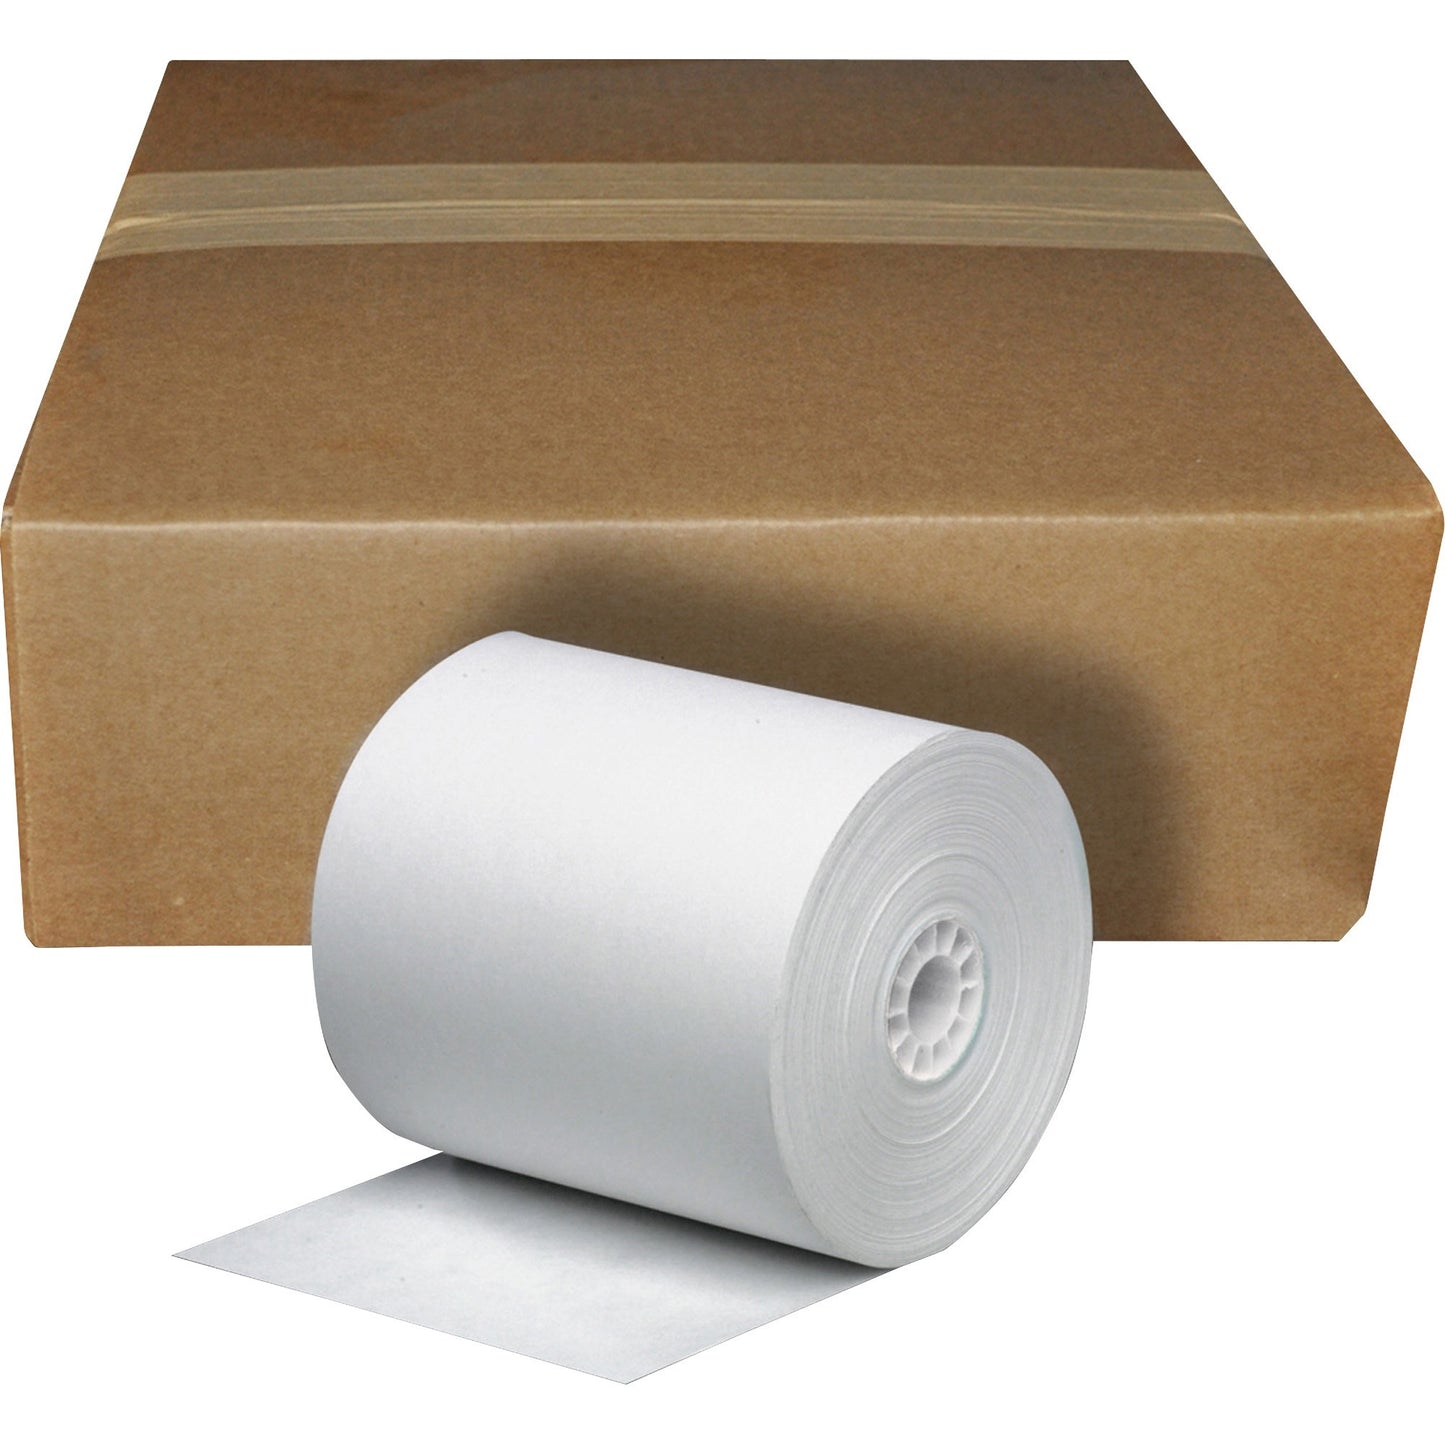 Business Source Cash Register Roll - White